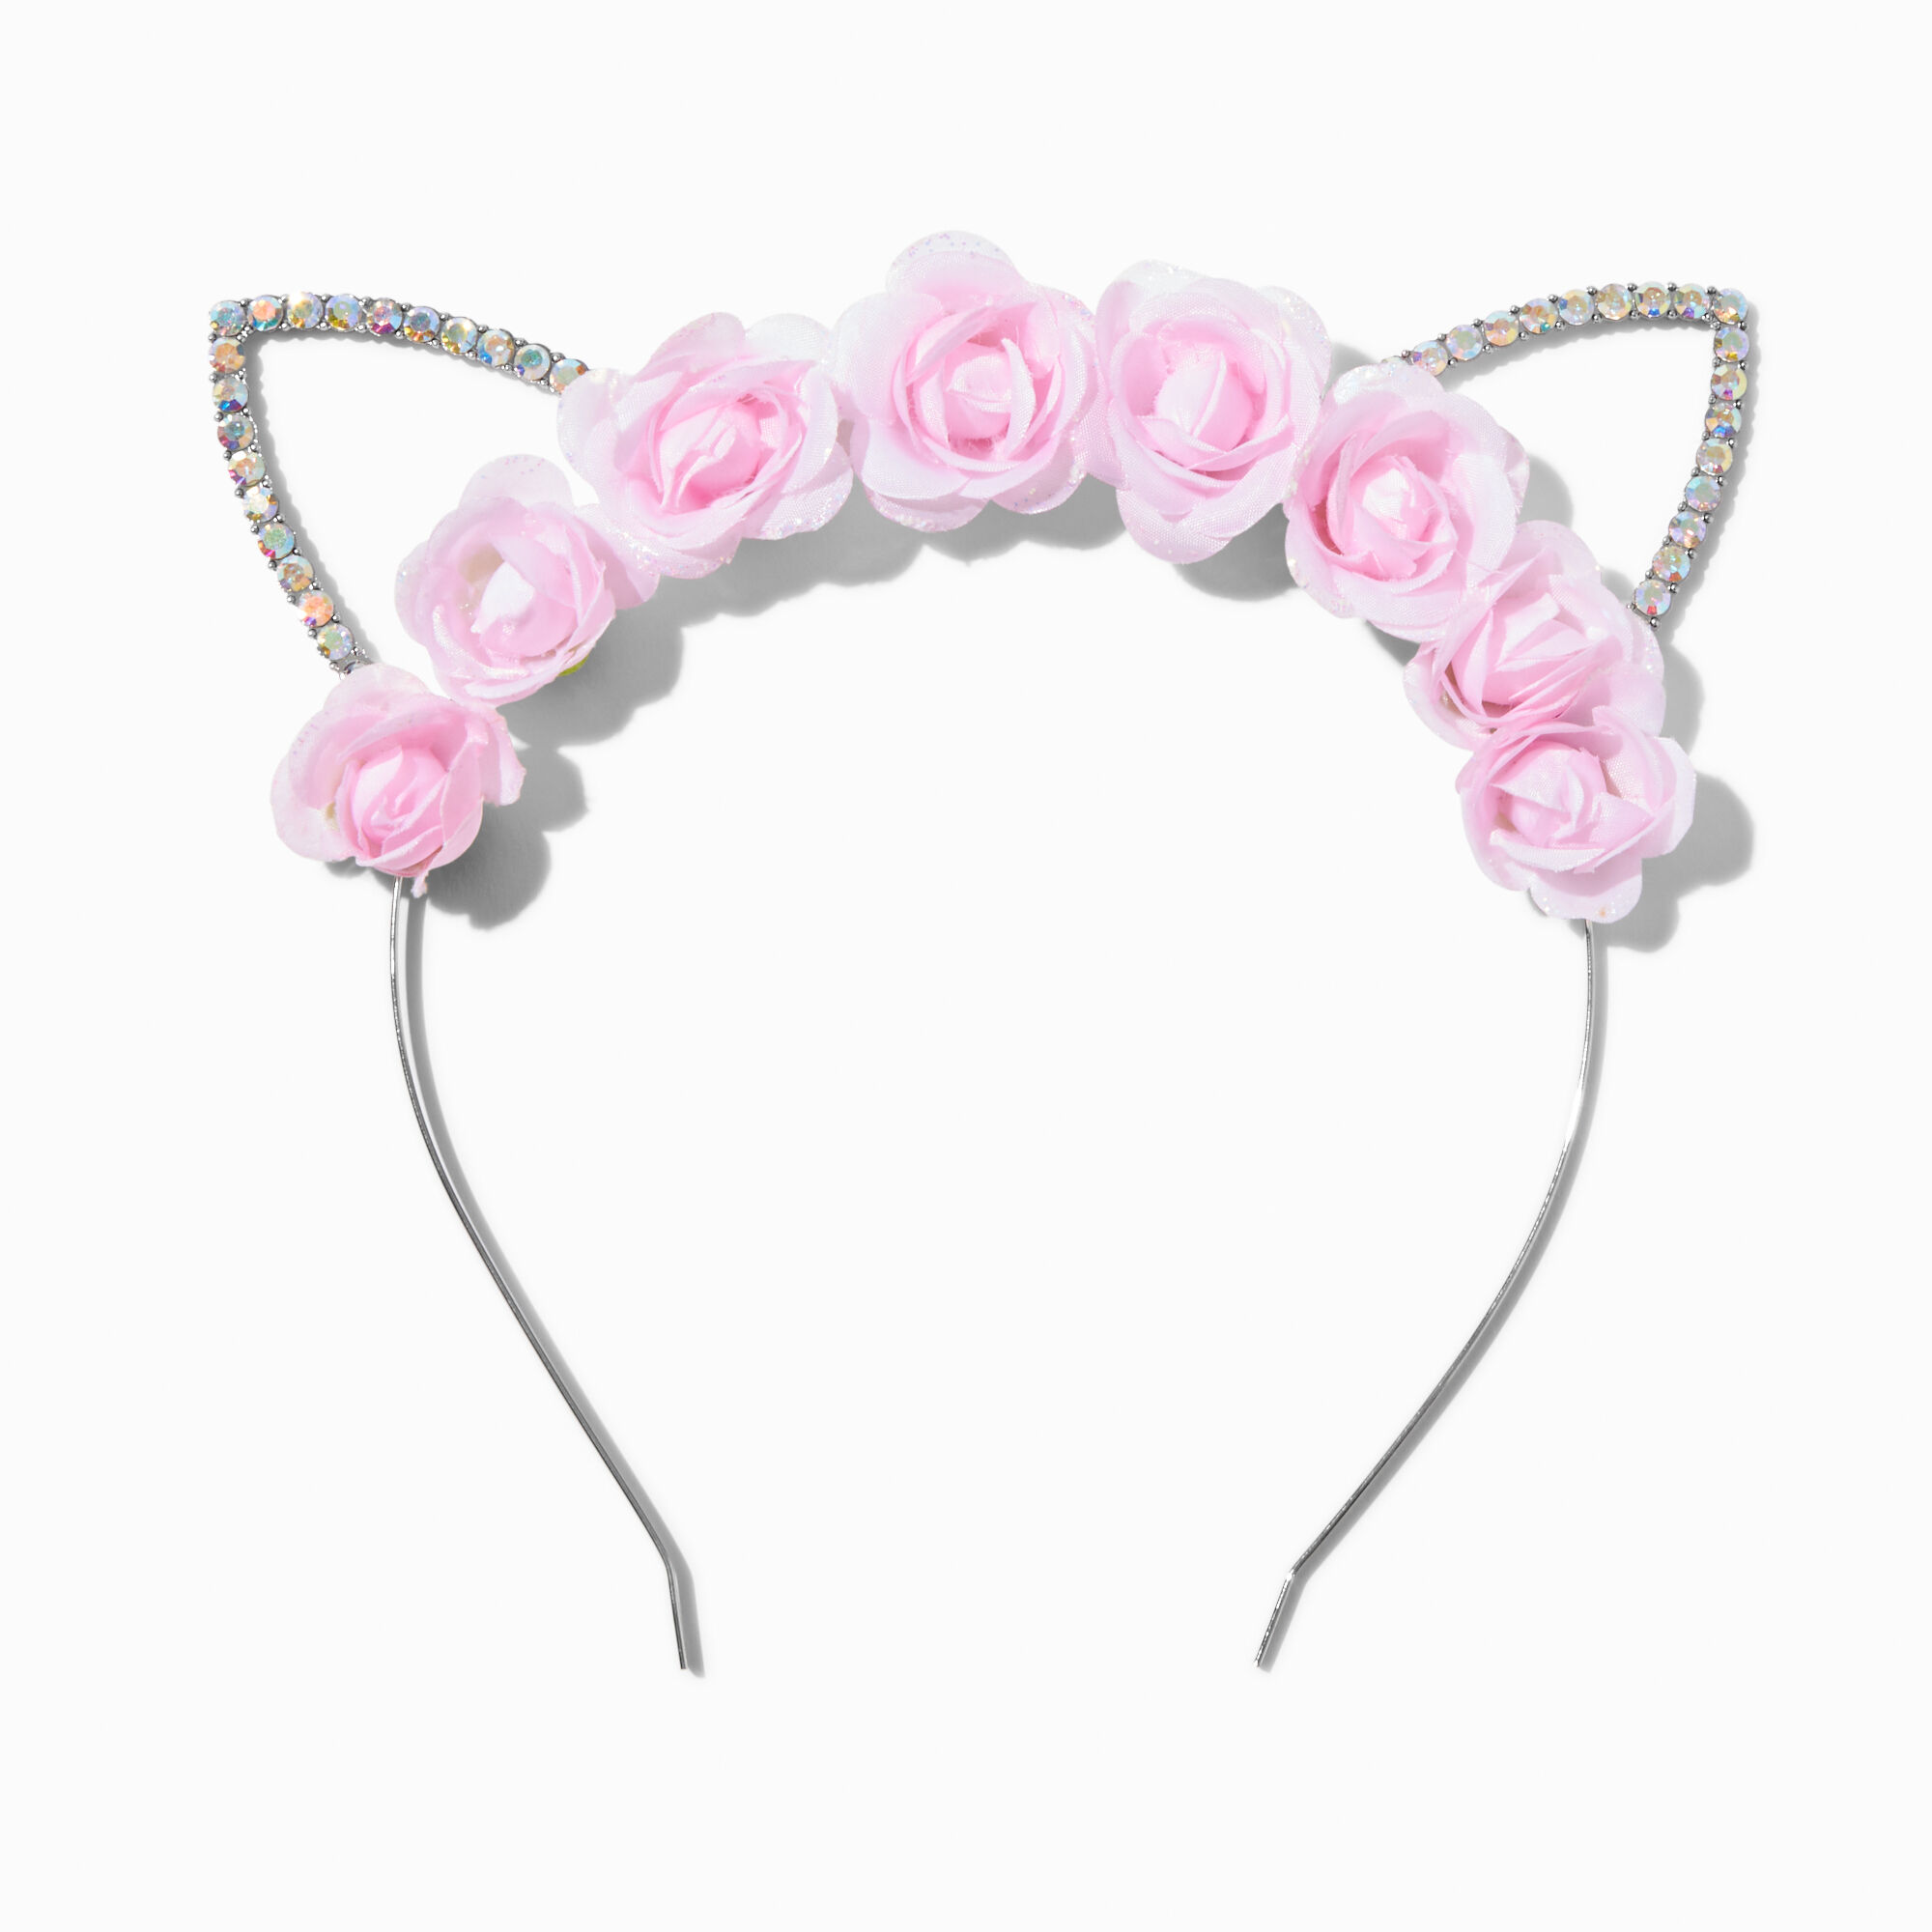 View Claires Flower Iridescent Crystal Cat Ears Headband Pink information